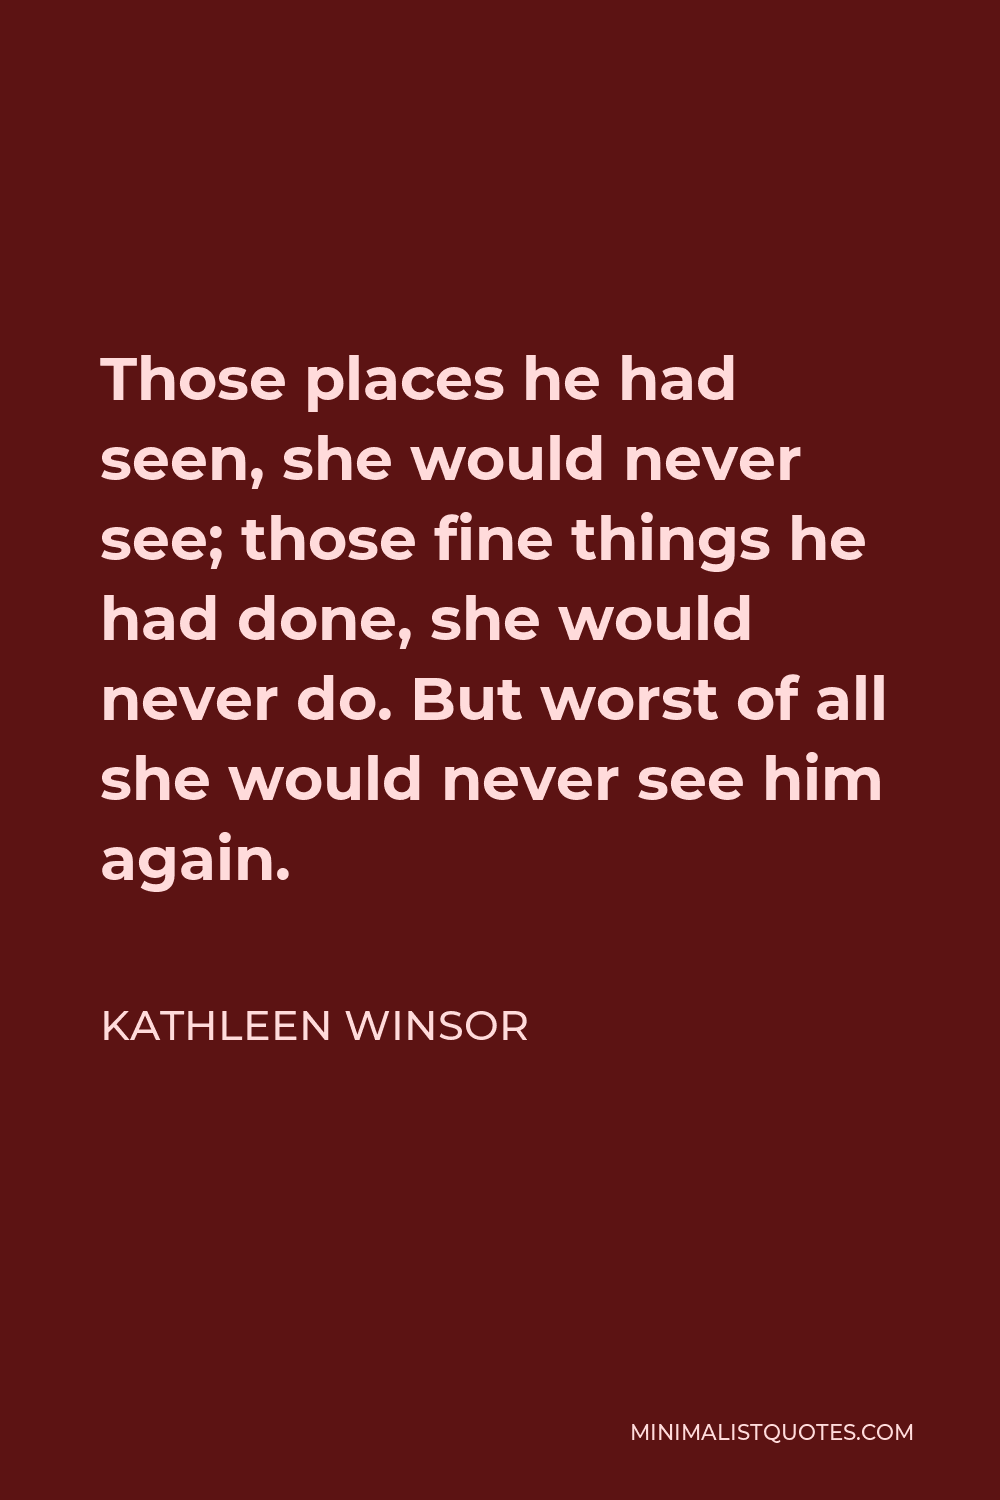 Kathleen Winsor Quote - Those places he had seen, she would never see; those fine things he had done, she would never do. But worst of all she would never see him again.